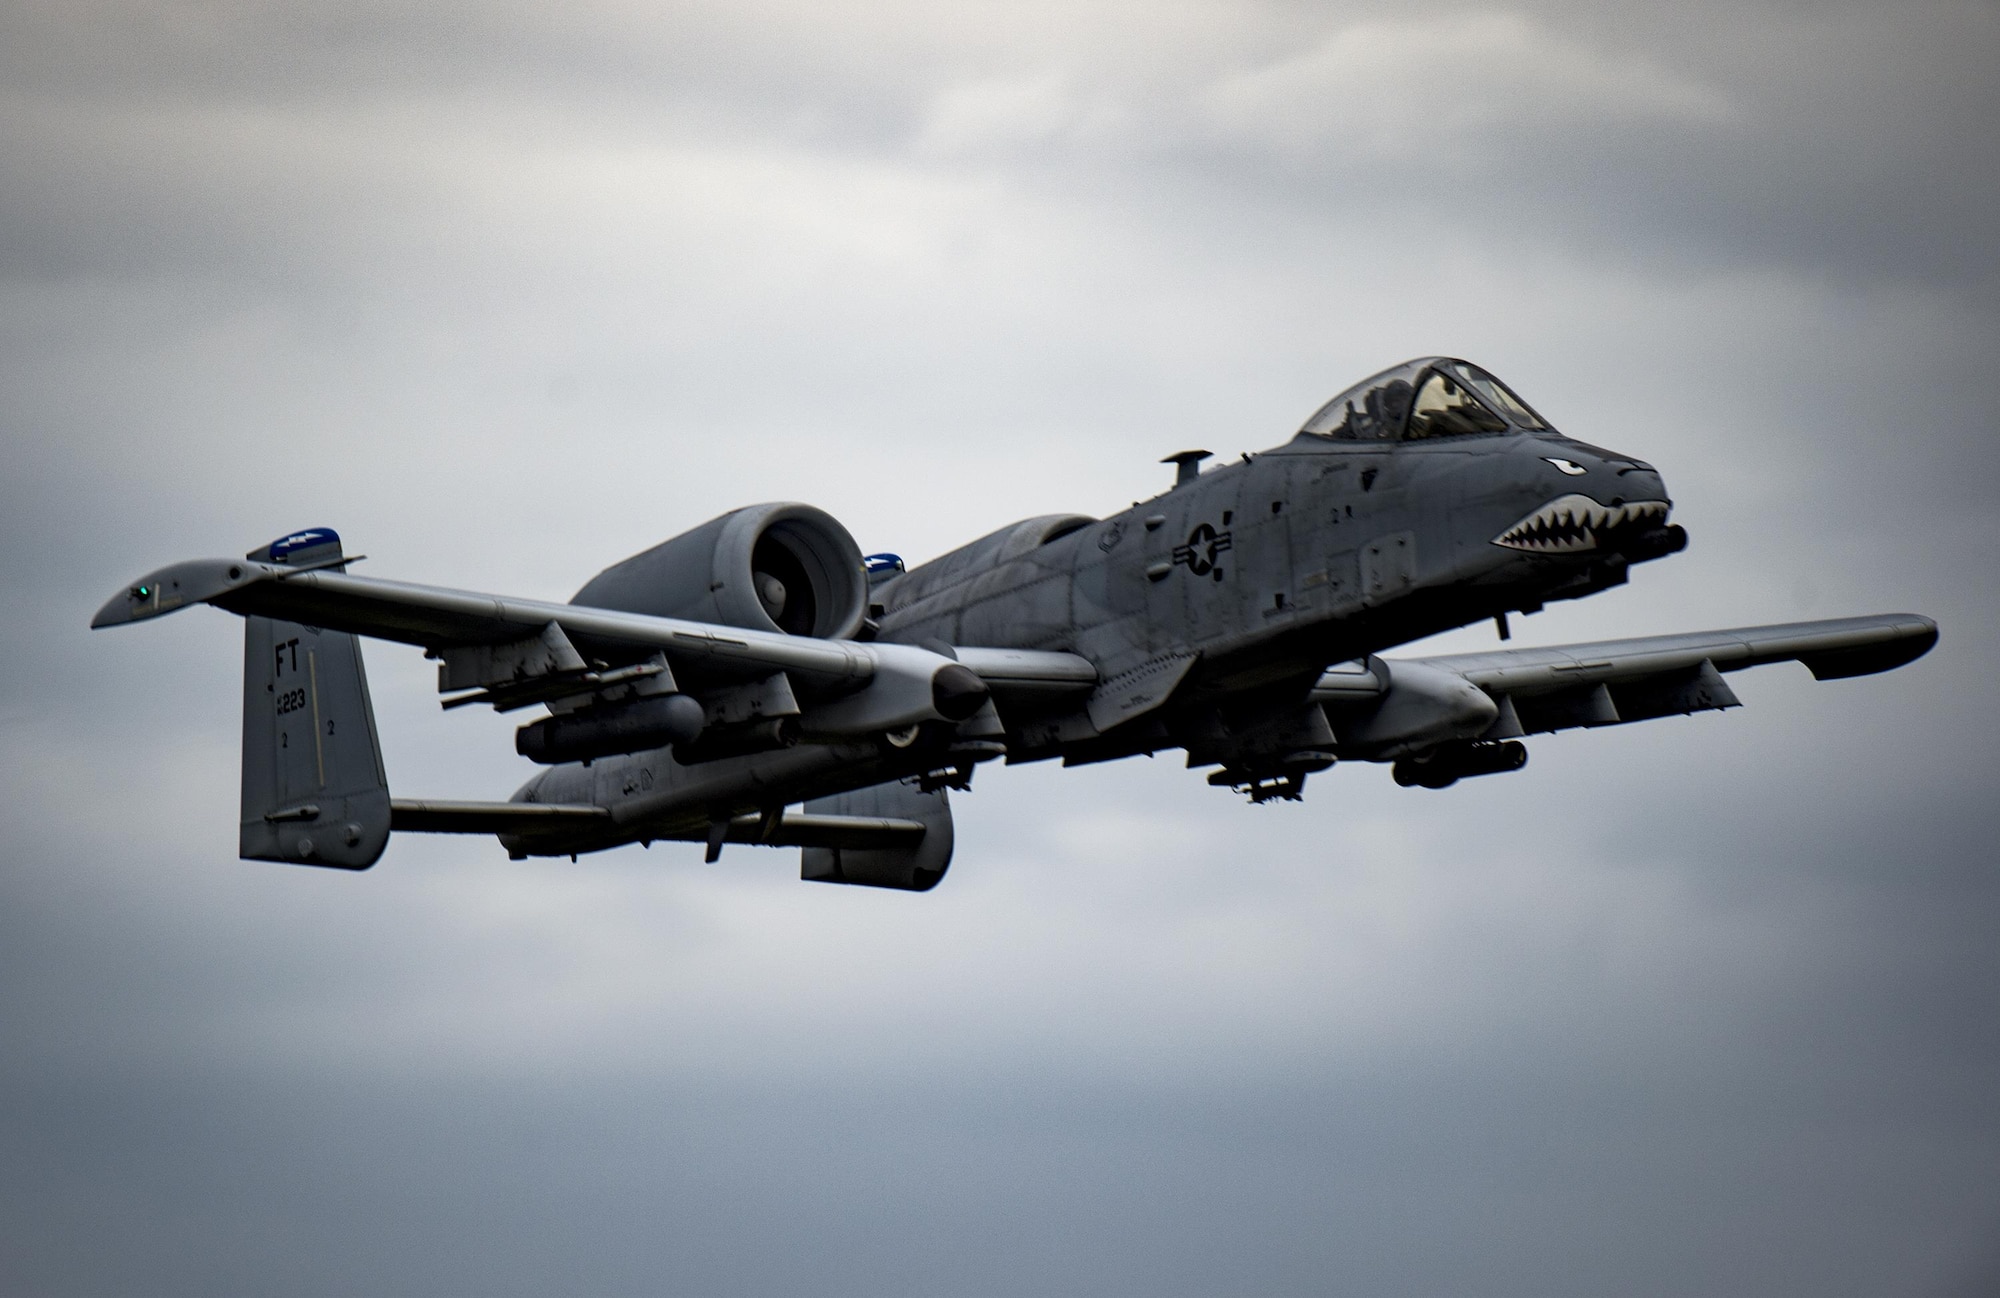 An A-10C Thunderbolt II flies over Grand Bay Bombing and Gunnery Range at Moody Air Force Base, Ga., May 20, 2016. The A-10 participated in joint training with multiple aircraft including F-16 Fighting Falcons, F-15E Strike Eagles and HH-60G Pave Hawk helicopters. (U.S. Air Force photo by Tech. Sgt. Zachary Wolf/Released)